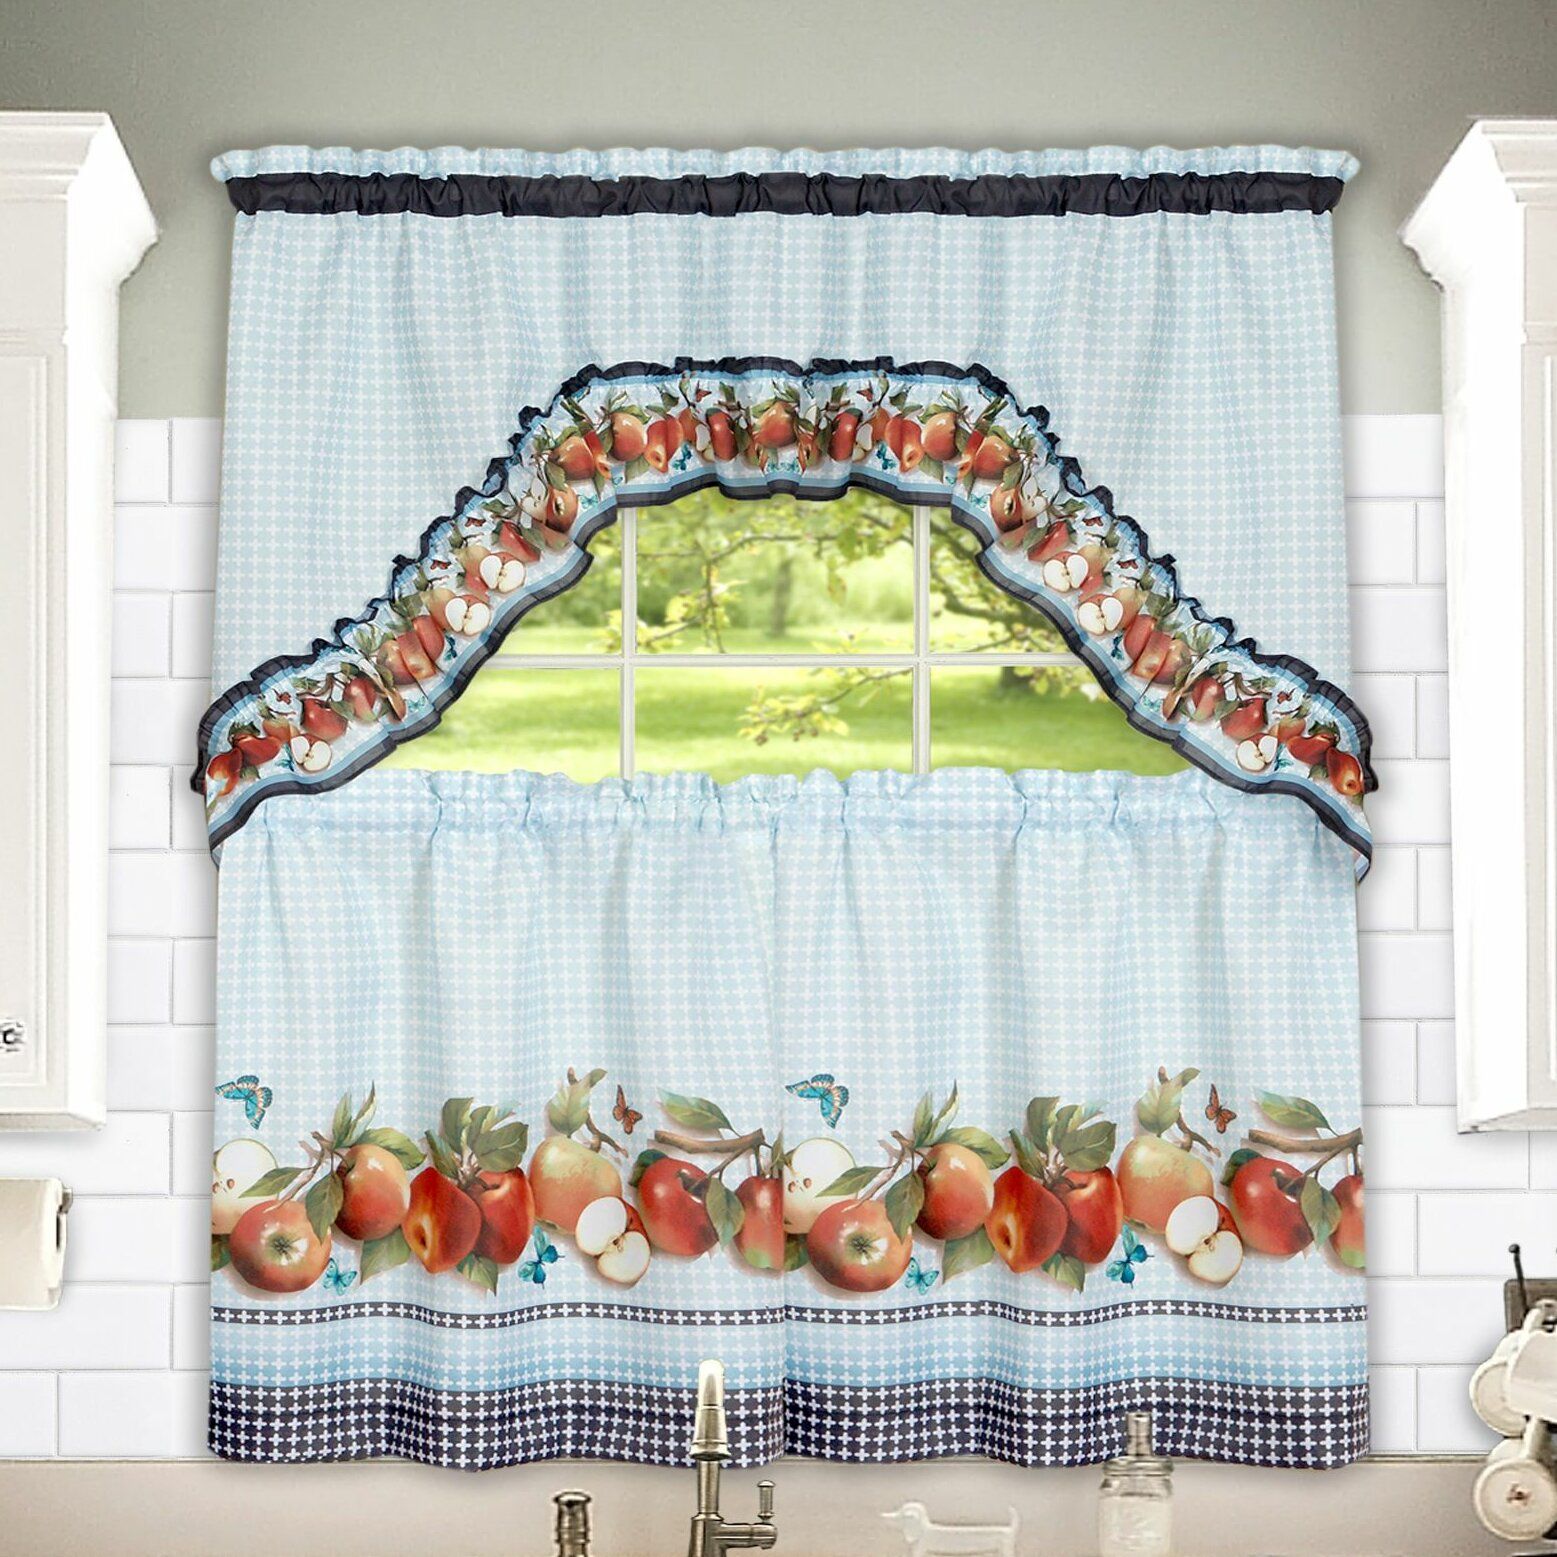 Golden Delicious 57" Tier And Swag Set With Regard To Traditional Tailored Tier And Swag Window Curtains Sets With Ornate Flower Garden Print (Photo 18 of 20)